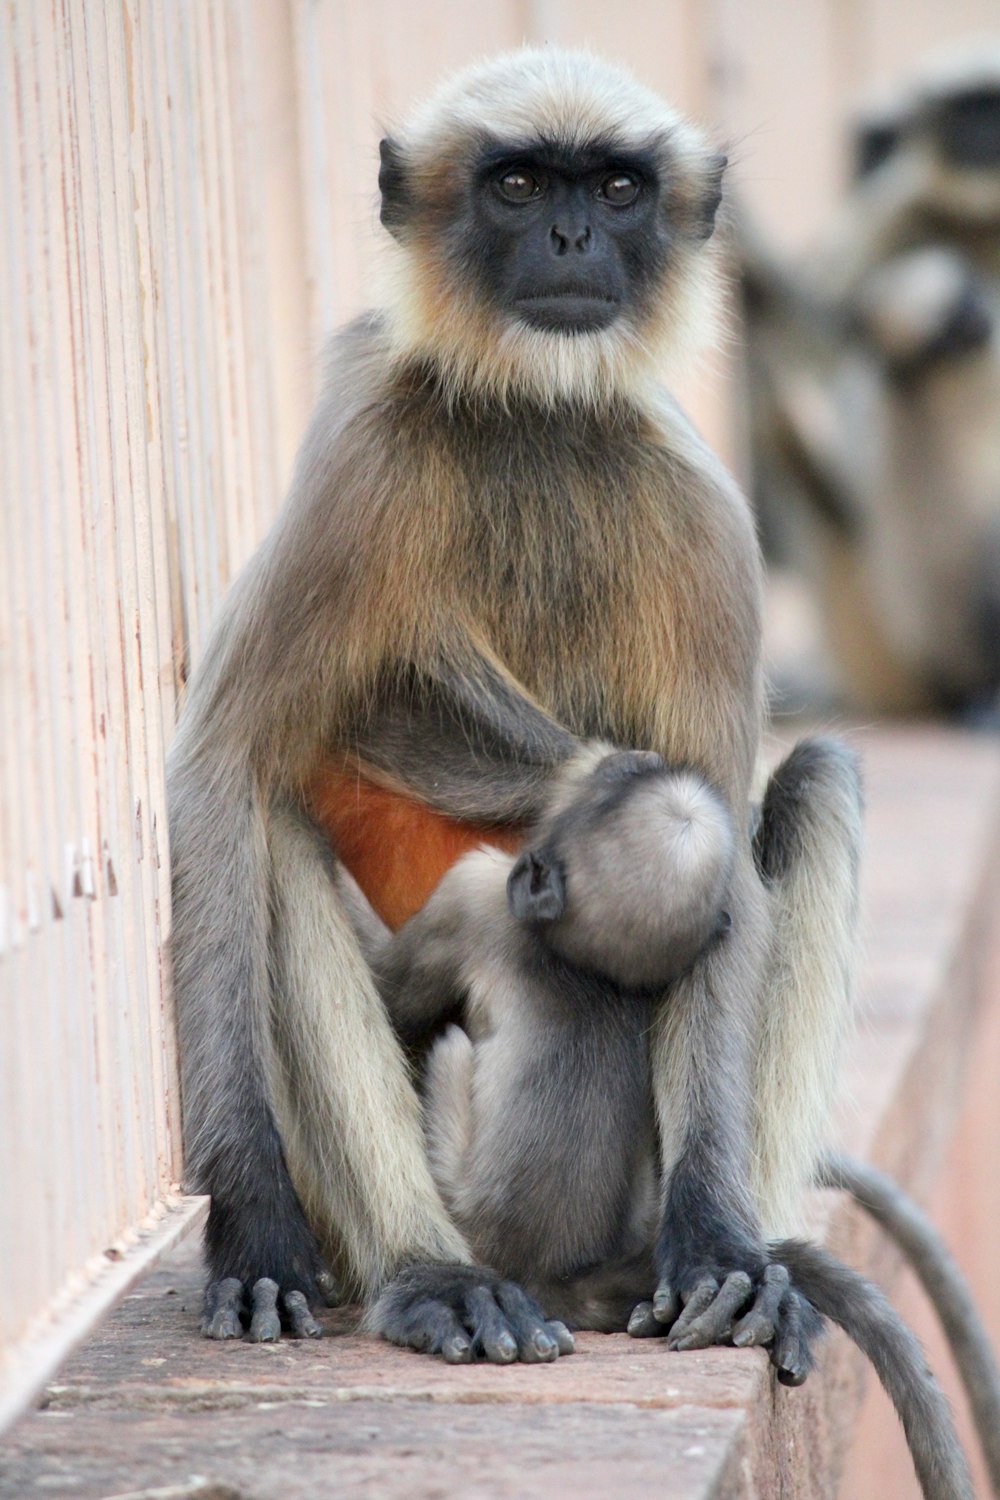 a monkey and its baby sitting on a ledge